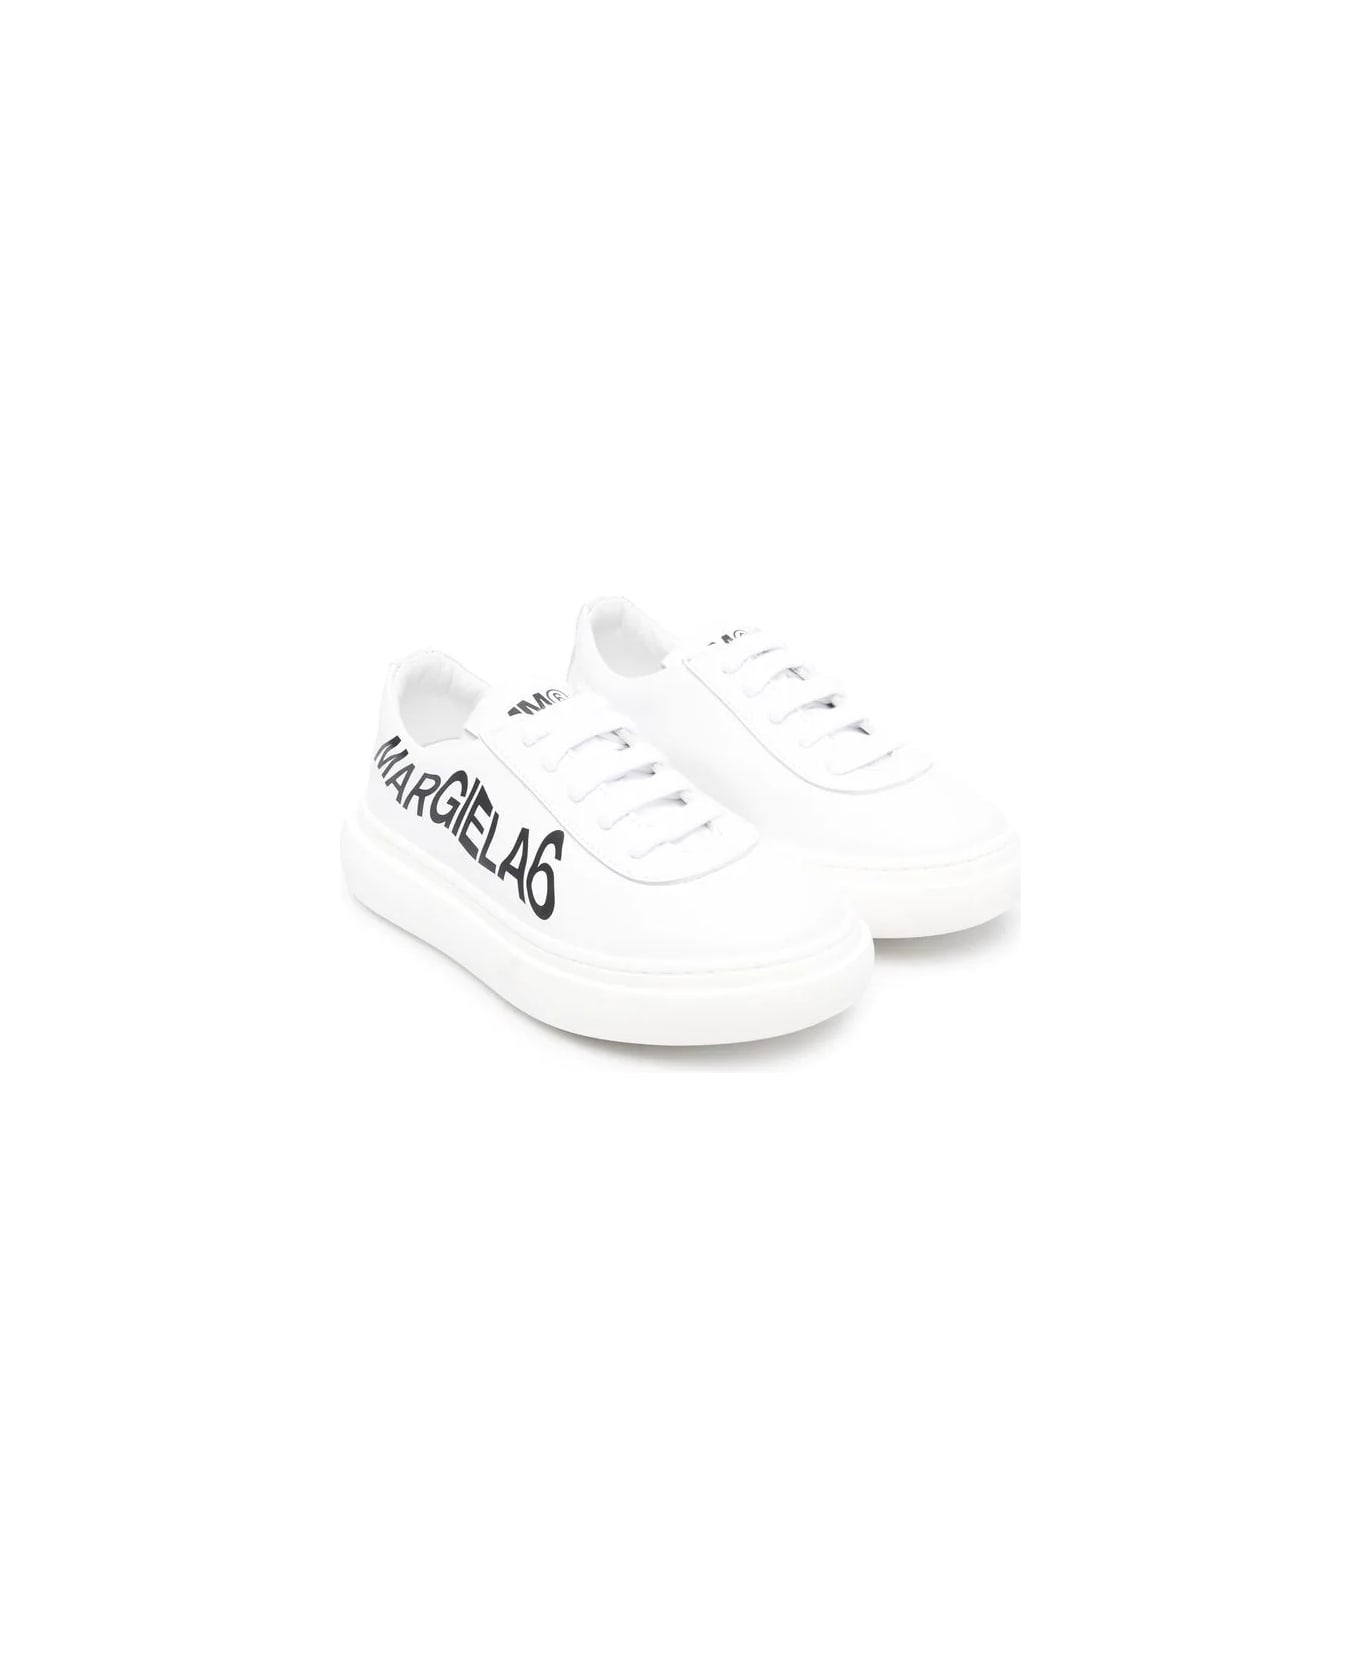 MM6 Maison Margiela Sneakers With Print - White シューズ